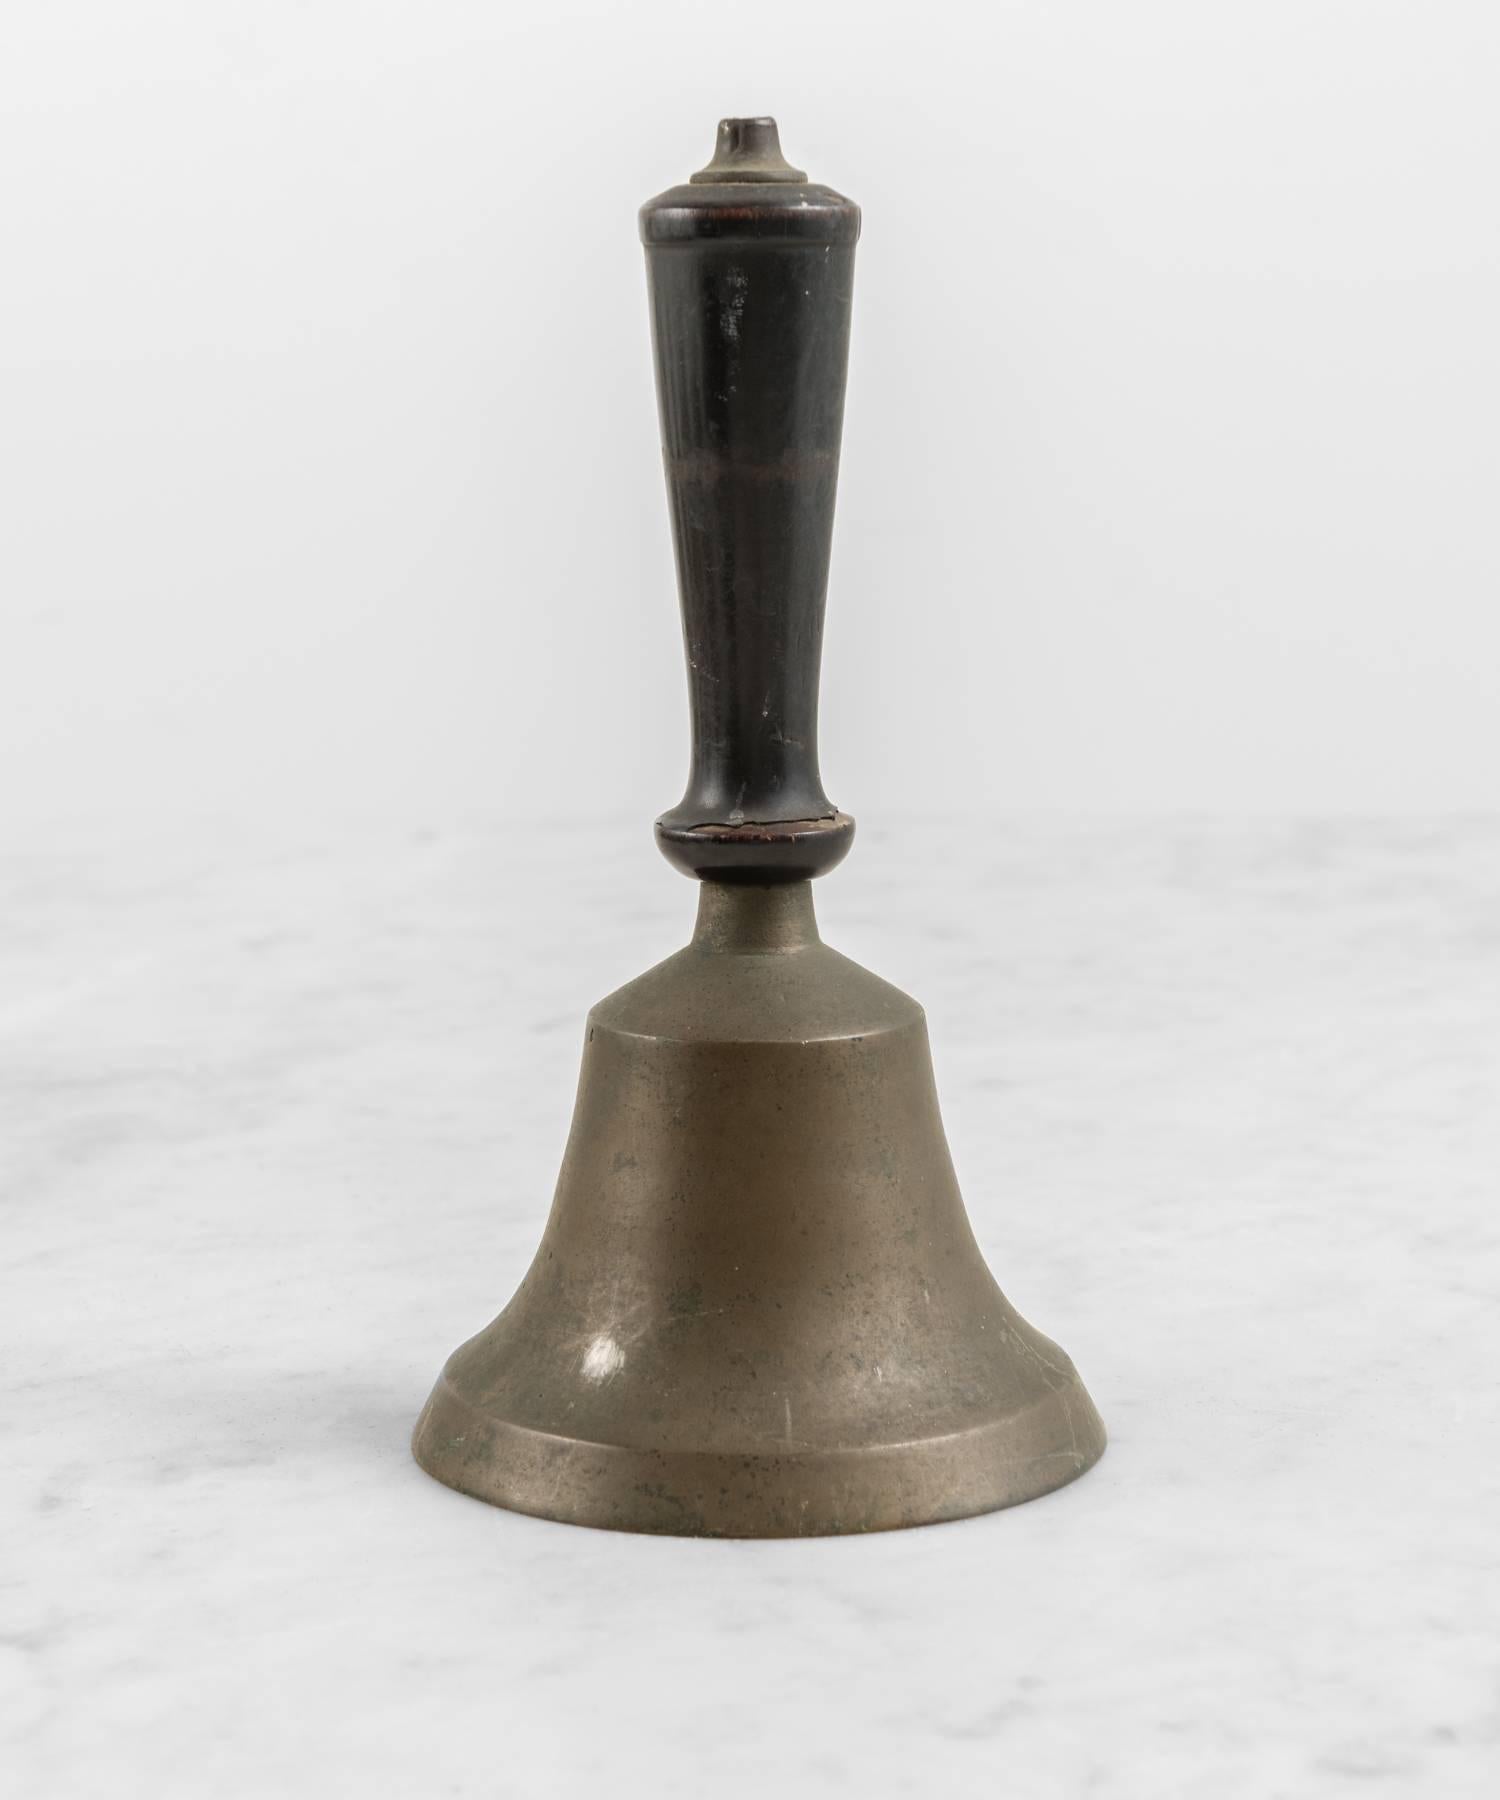 Medium Sized Bell with Wooden Handle, circa 1900-1940 2